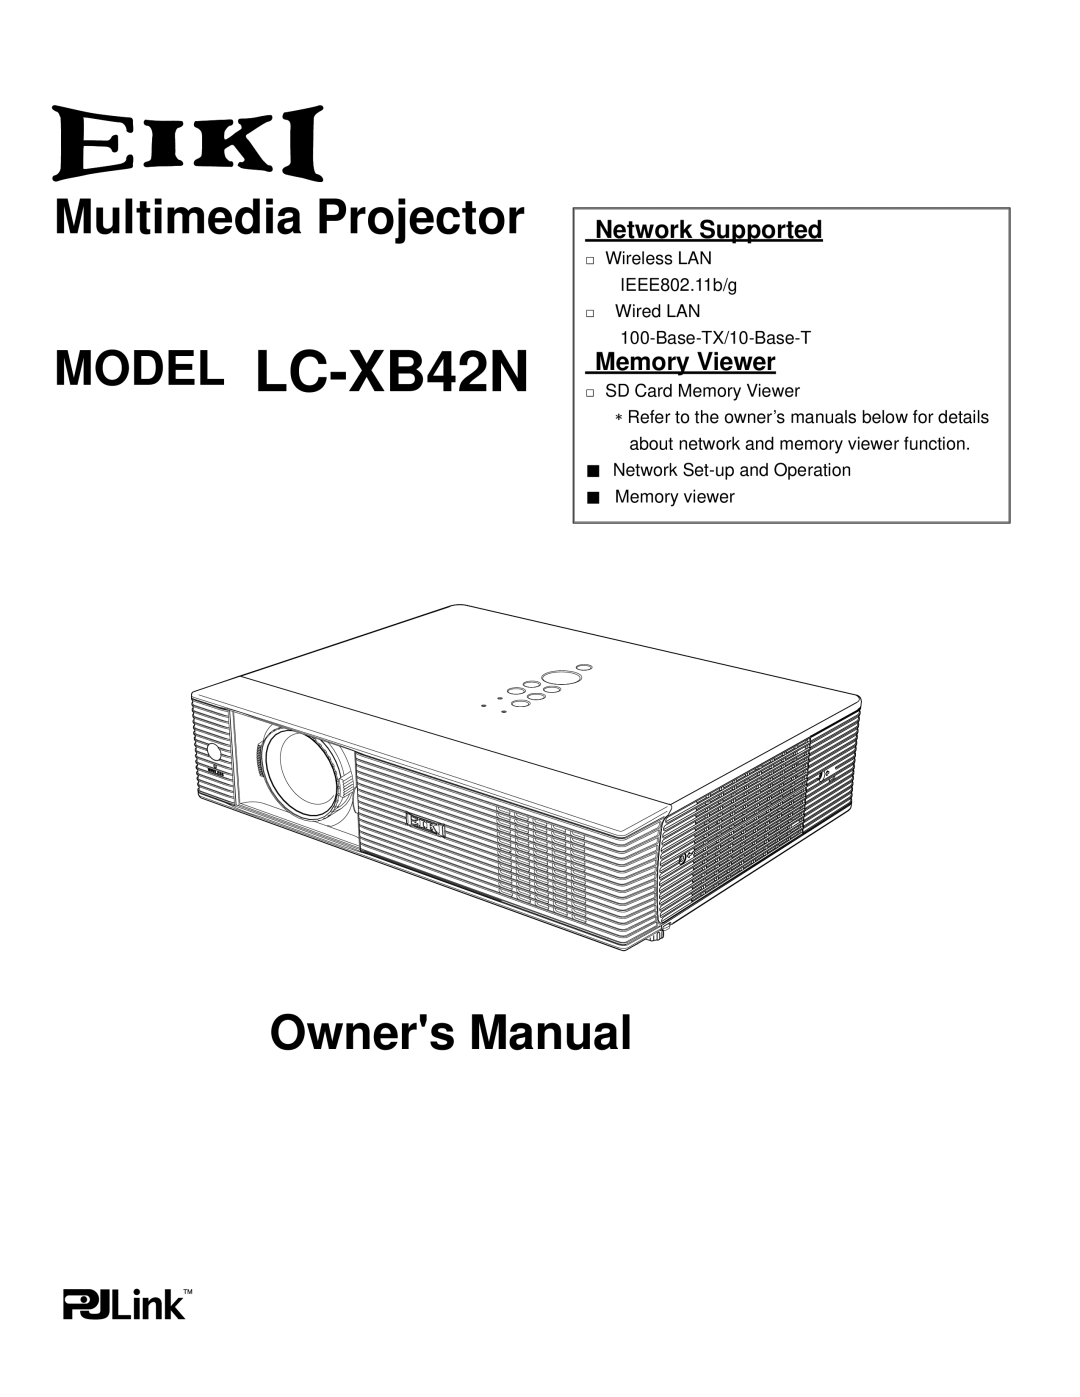 Eiki owner manual Network Supported, Memory Viewer, MODEL LC-XB42N, Multimedia Projector, Owners Manual 